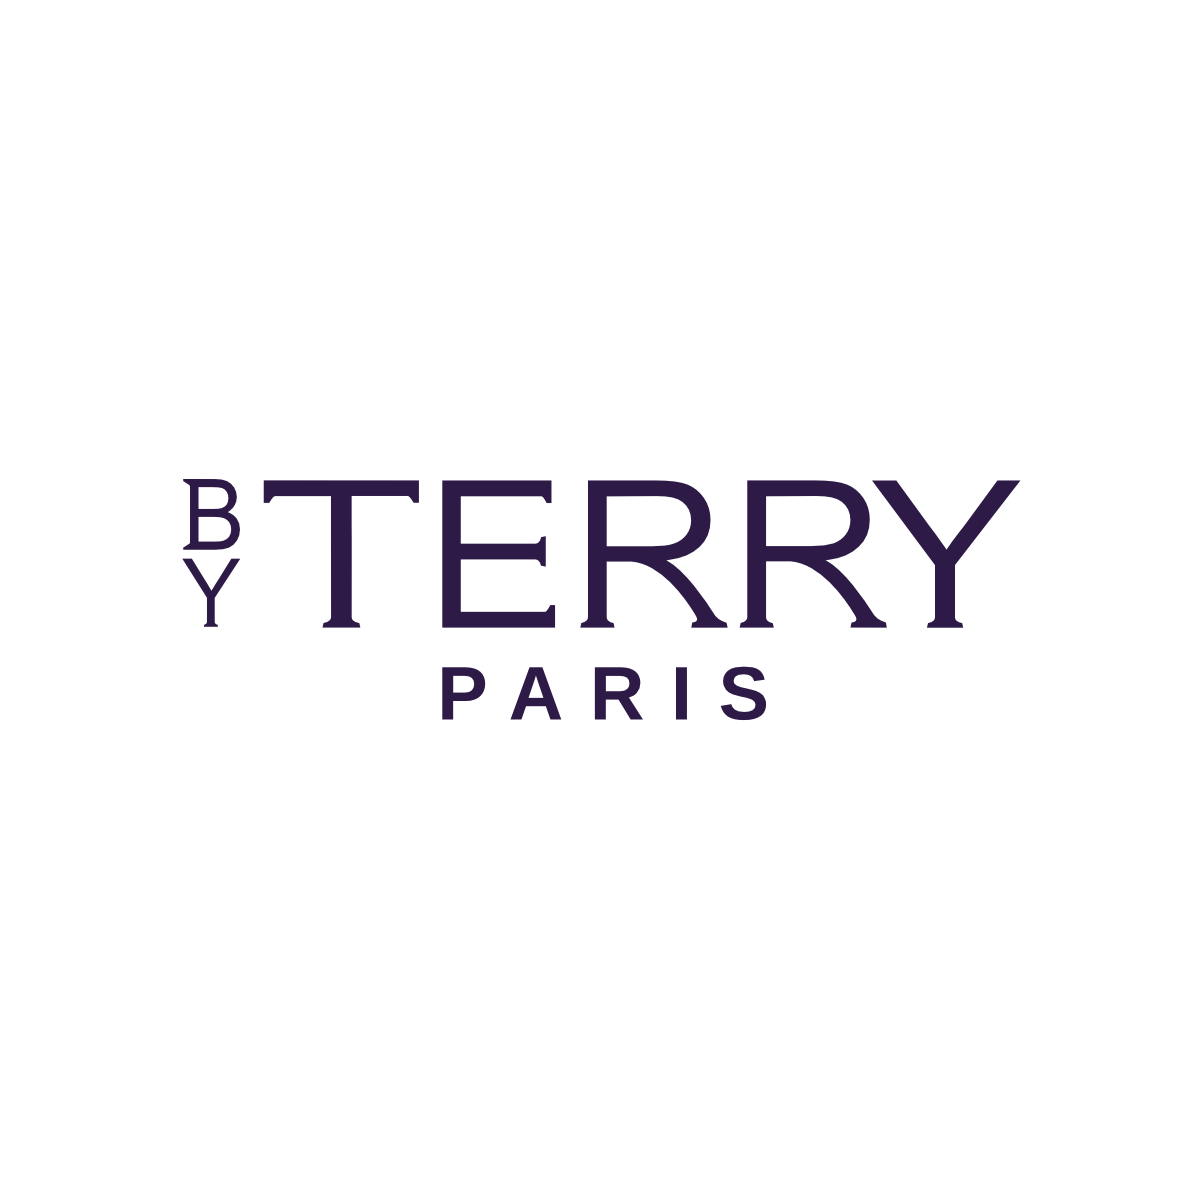 By Terry Coupons & Promo Codes